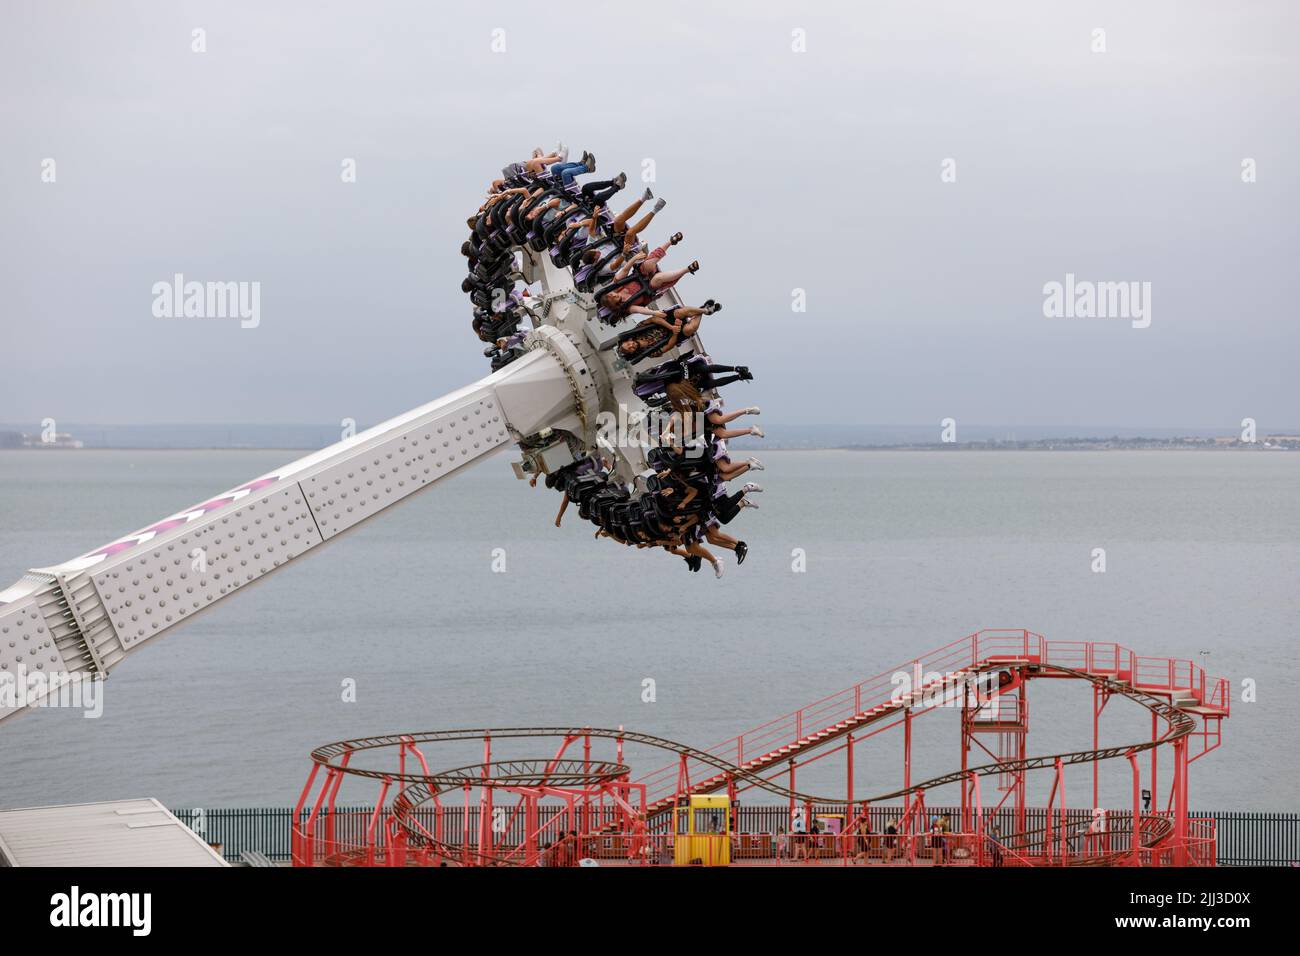 Crazy moment roller coaster stops, strands riders upside down